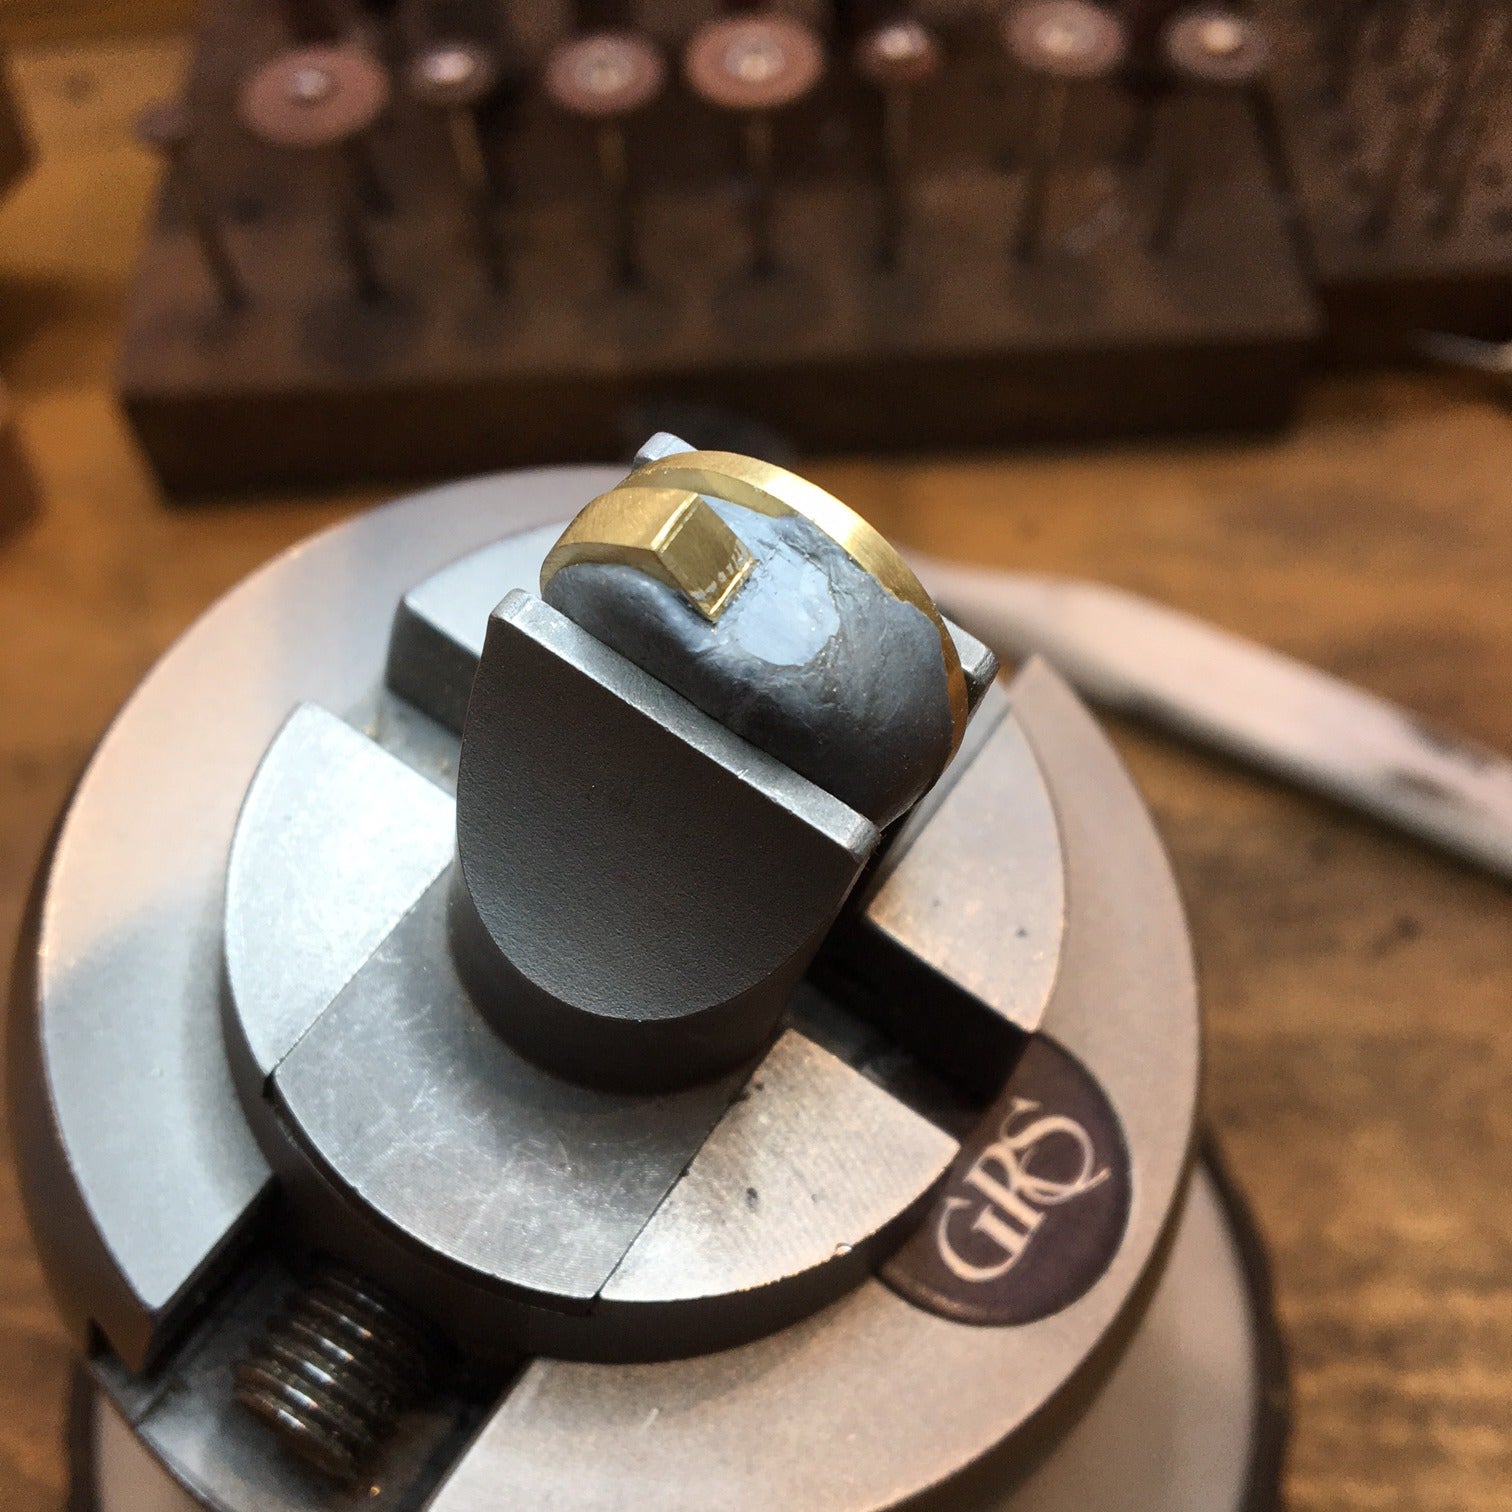 Forged gold ring being set with diamond